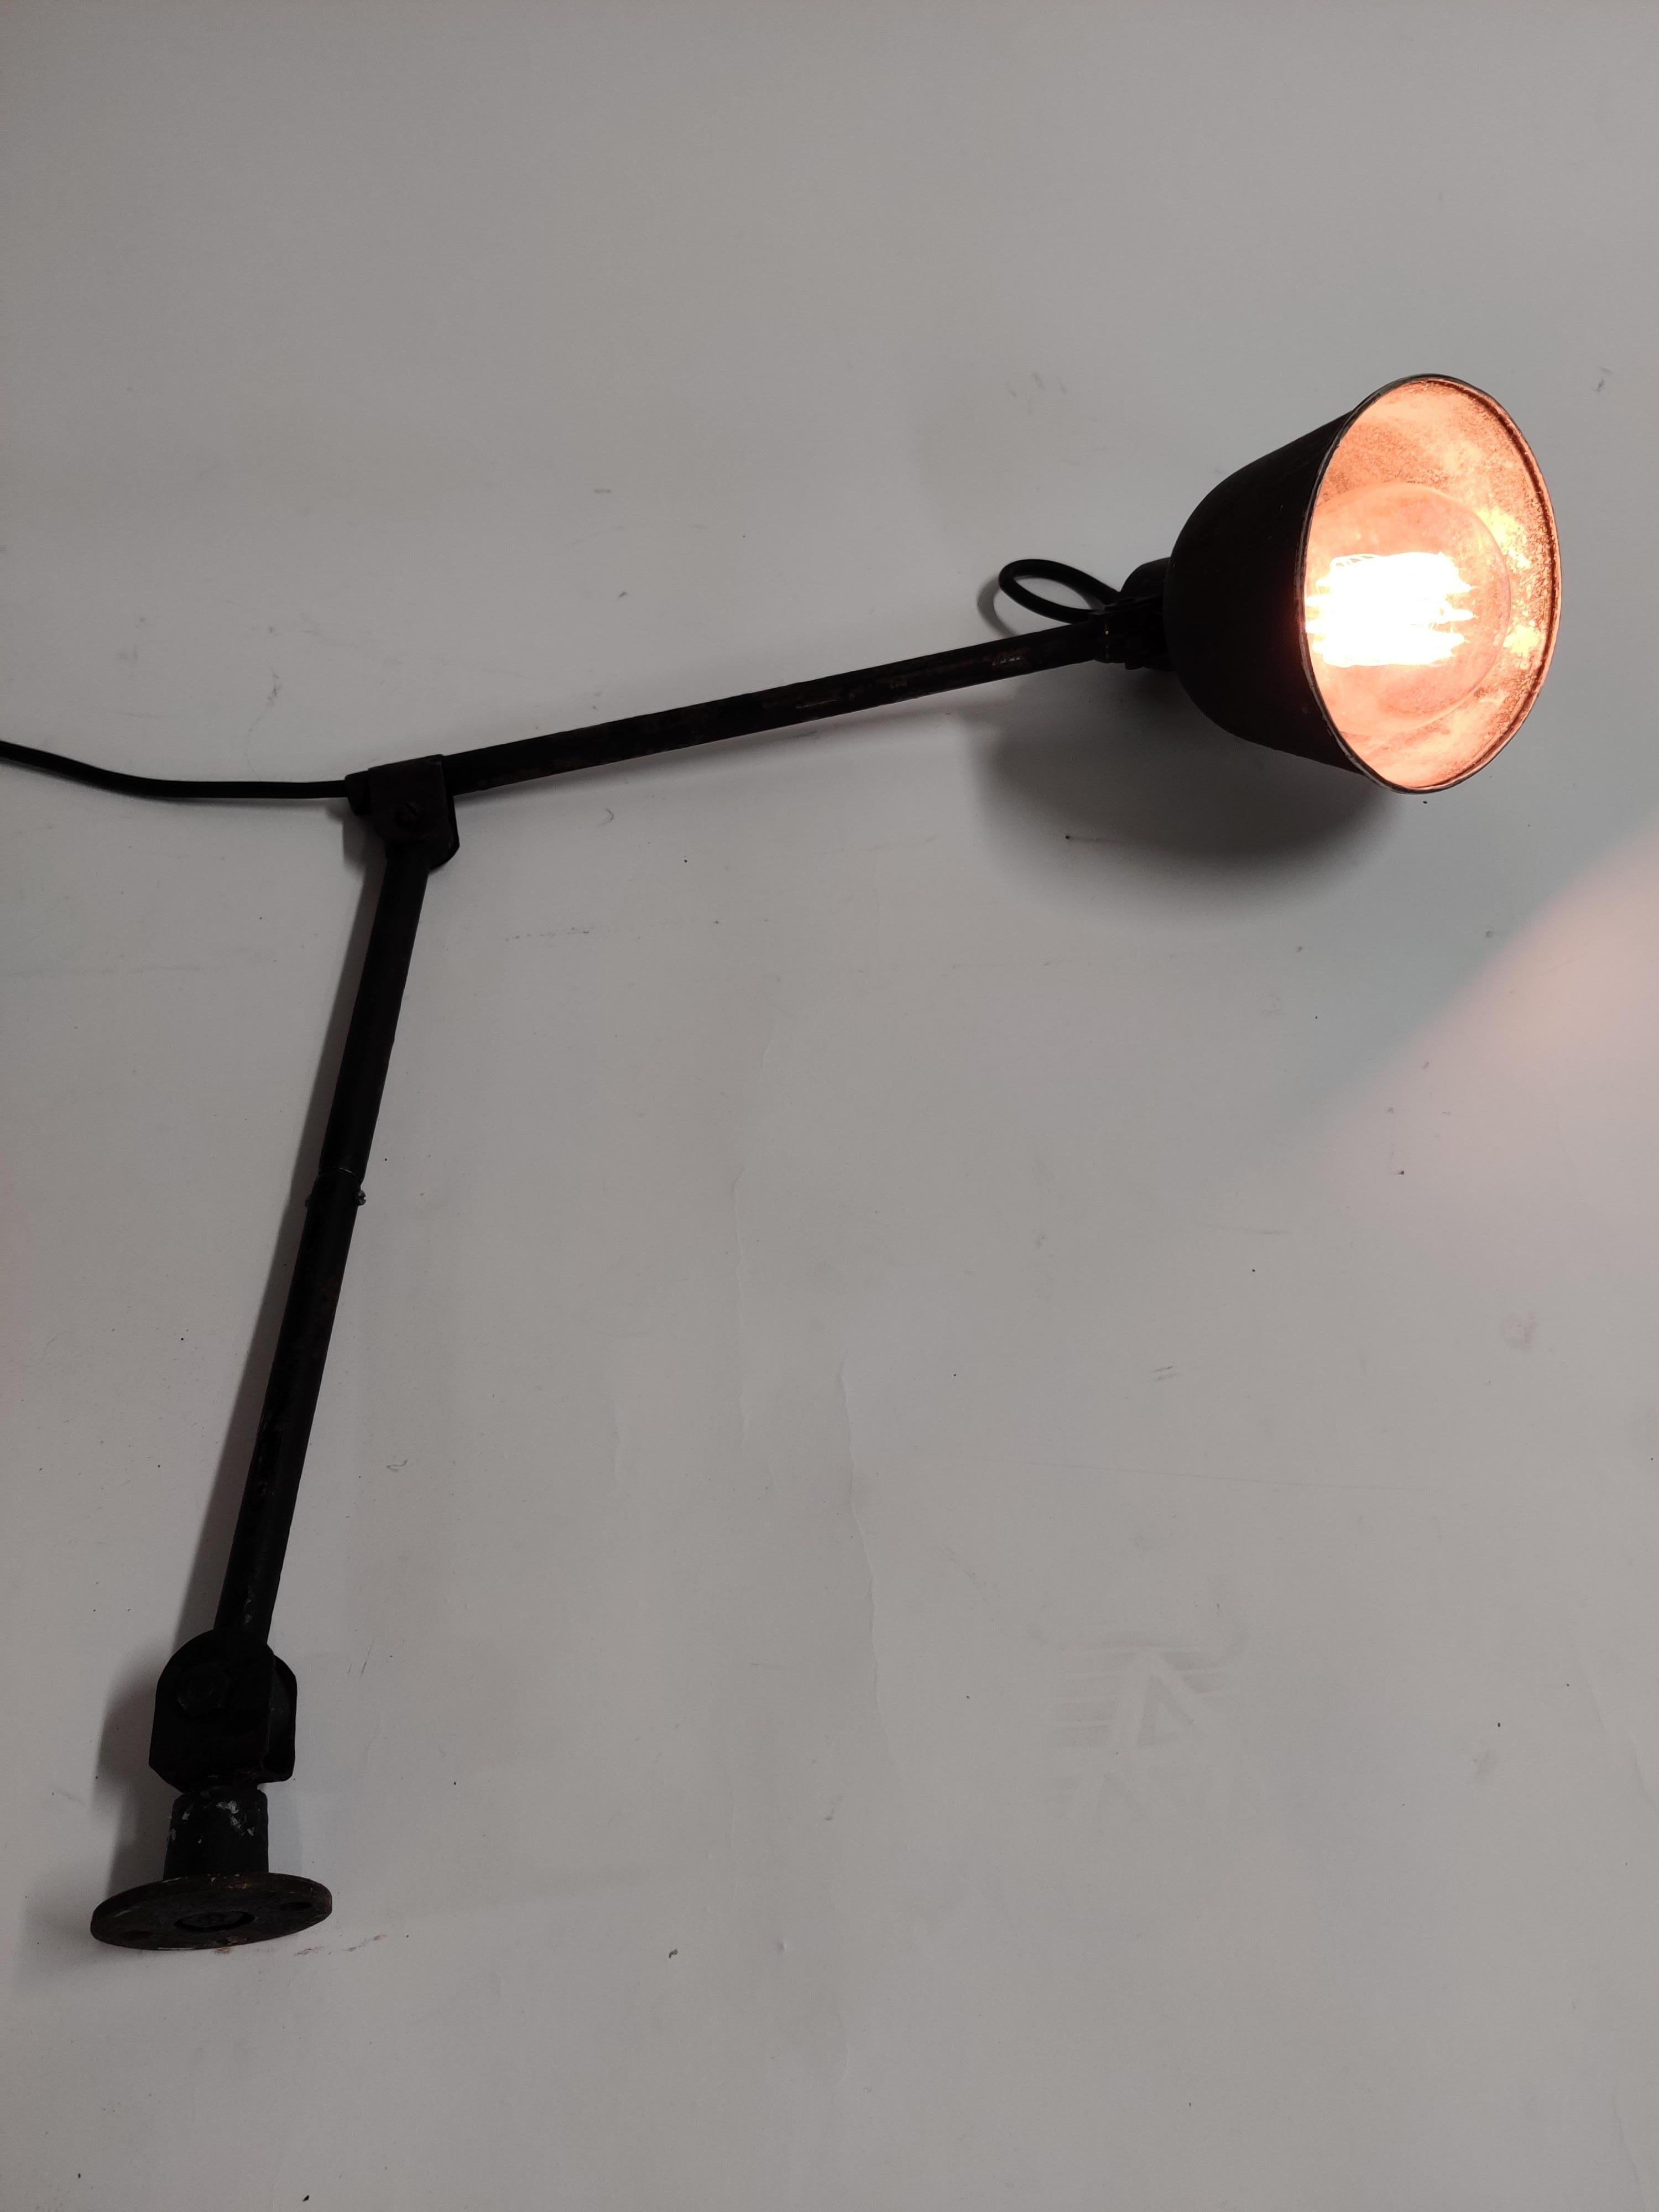 Vintage industrial work light or machinist lamp.

This articulated desk lamp is made of metal and has and adjustable lamp shade.

It can be mounted directly onto a work bench or on a metal or wooden base.

1950s,